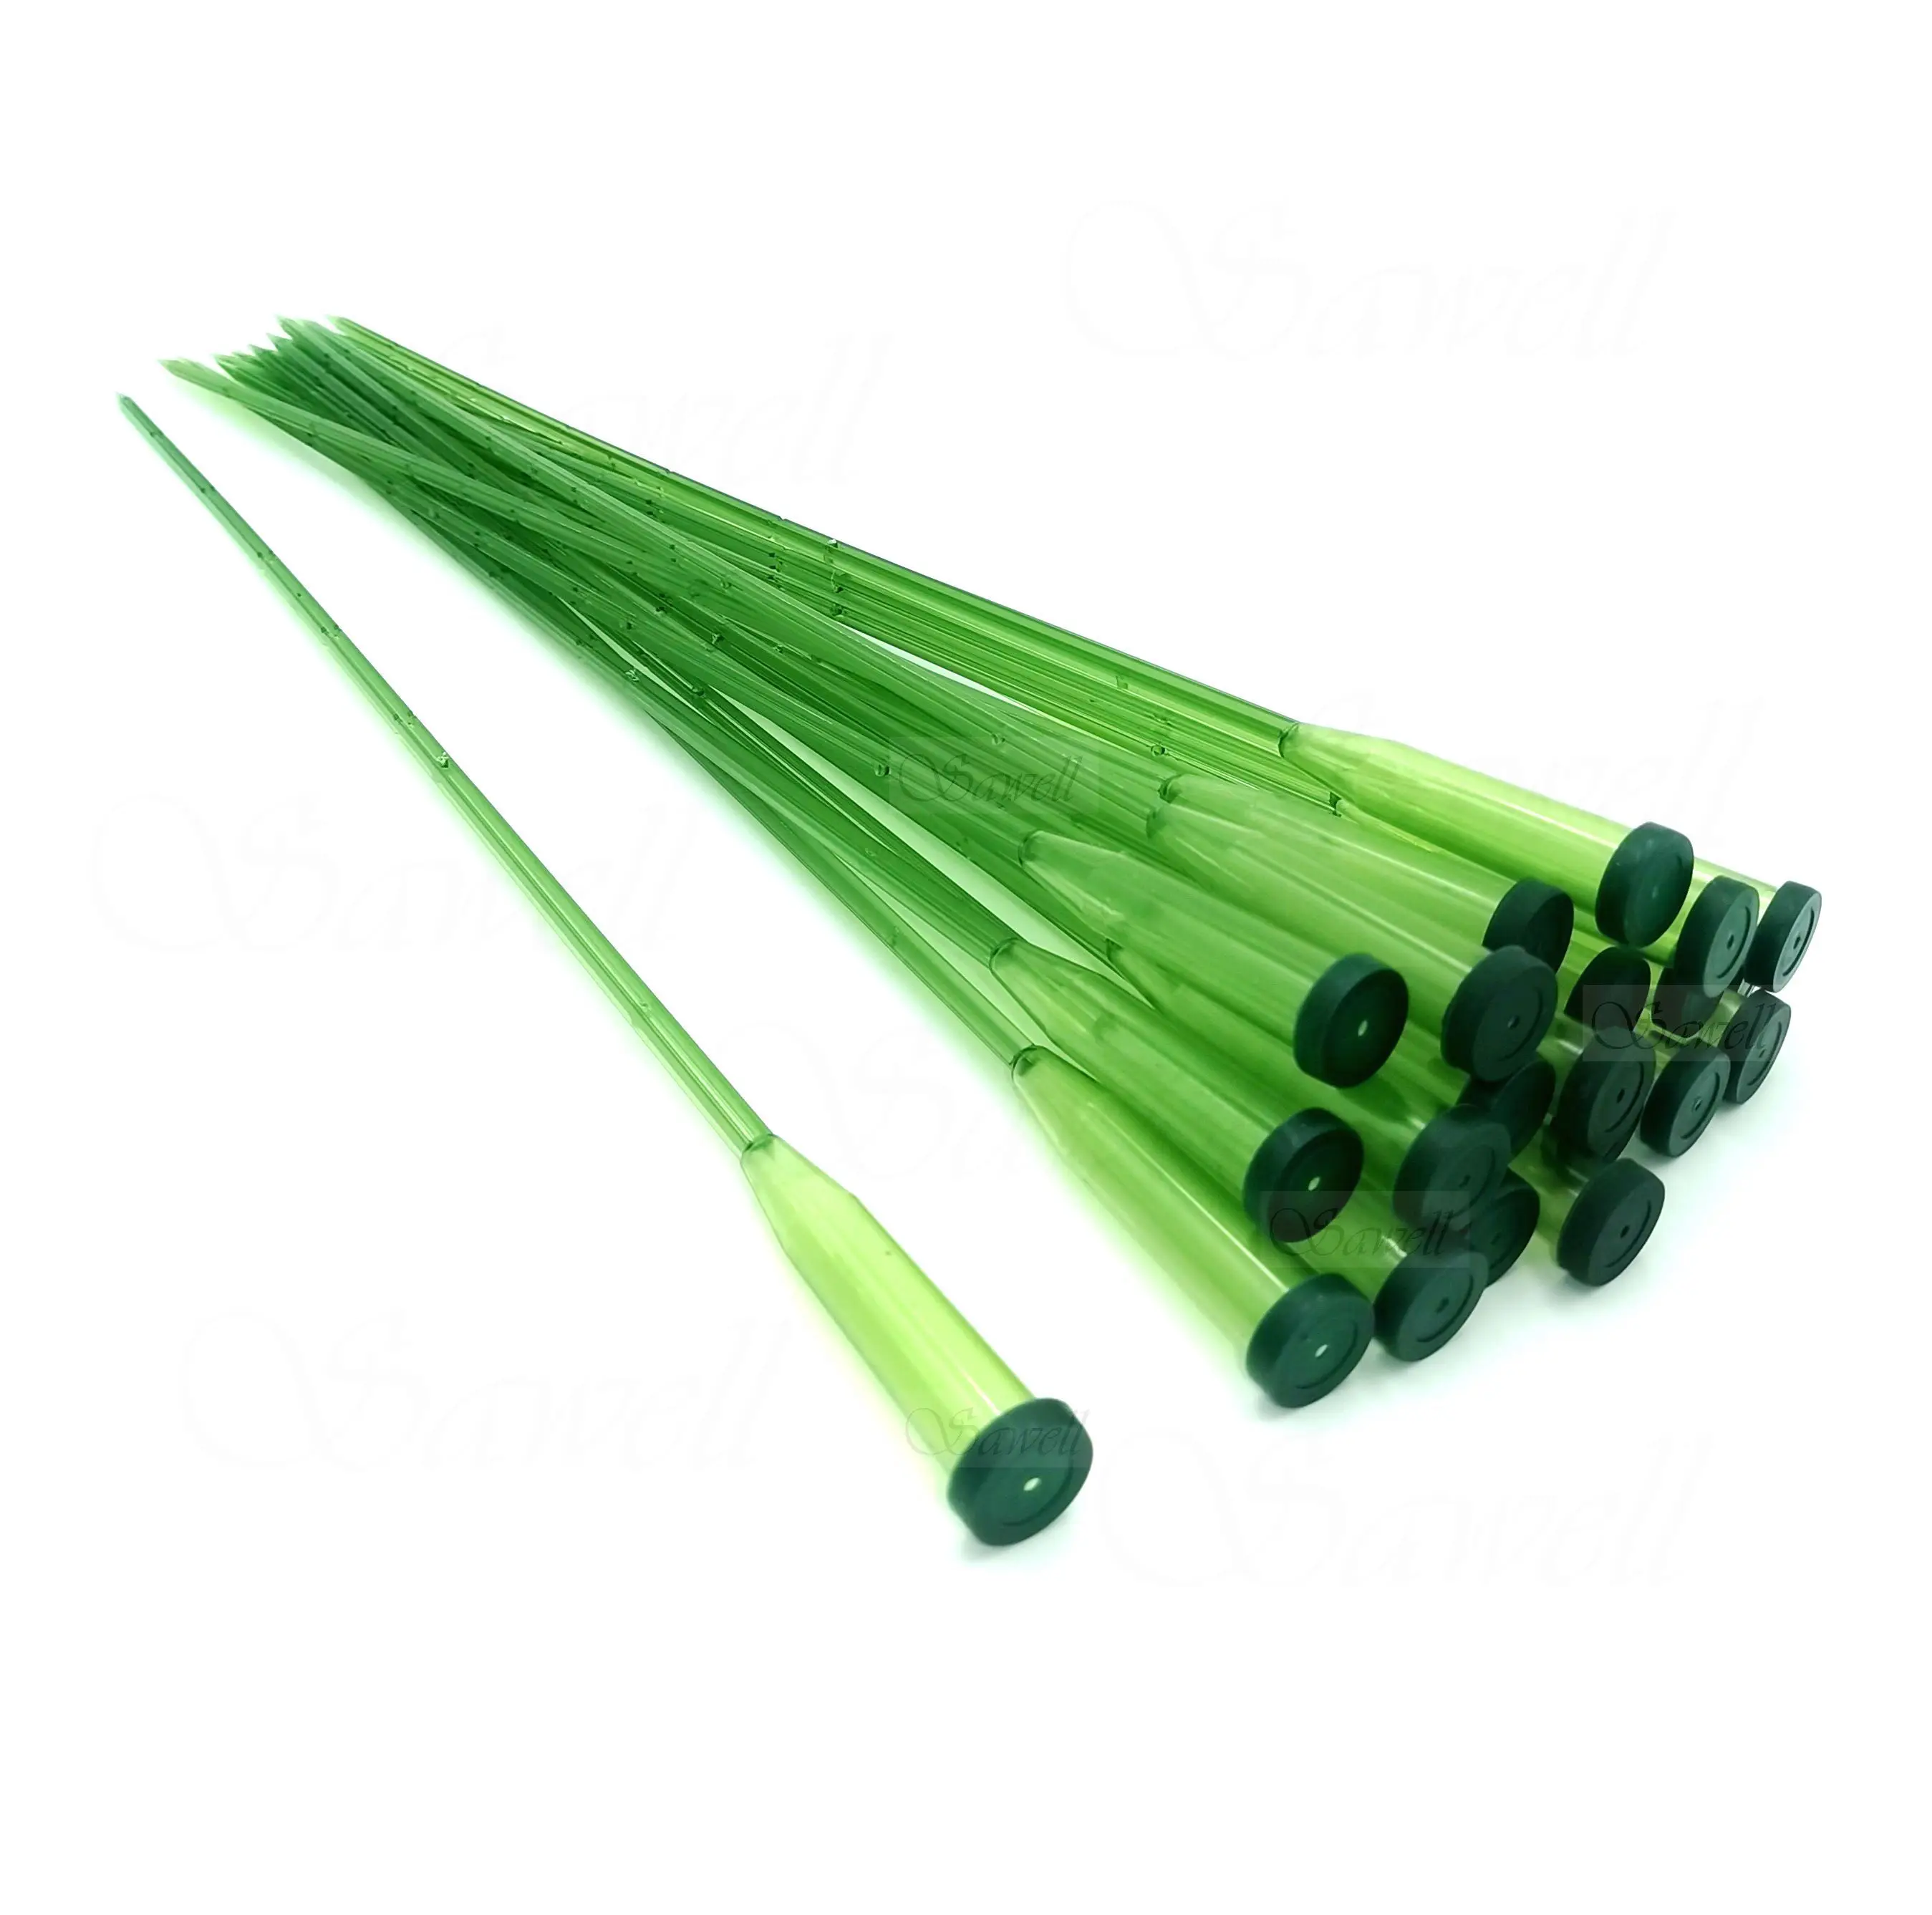 Floral Water Tubes, Supplies for Flower Arrangements (6 in, Green, 25 Pack)  - China Flower Tube, Floral Water Tube